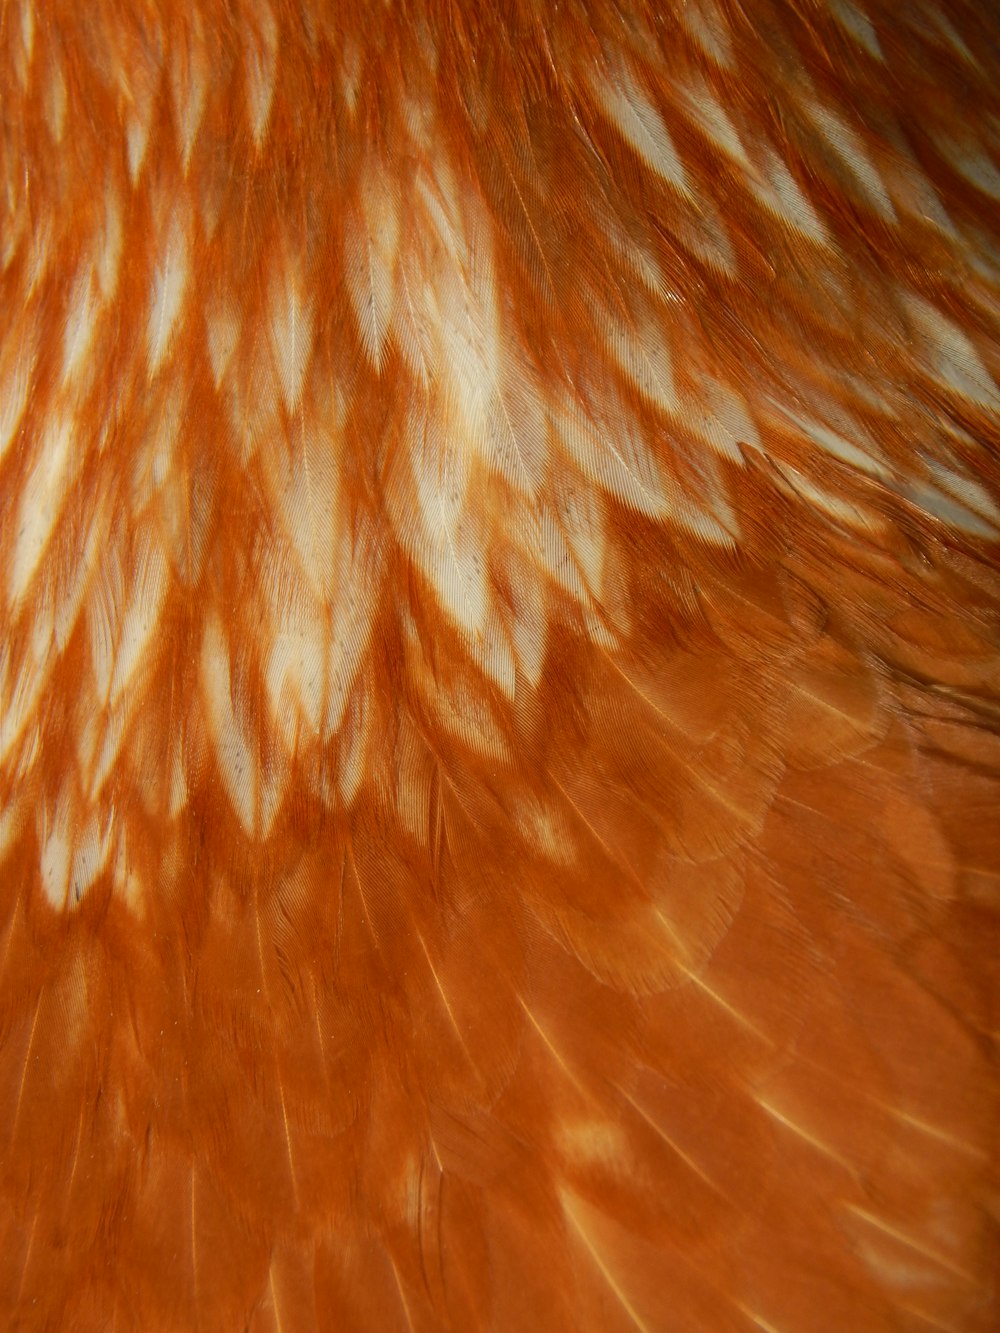 a close up of an orange and white bird's feathers